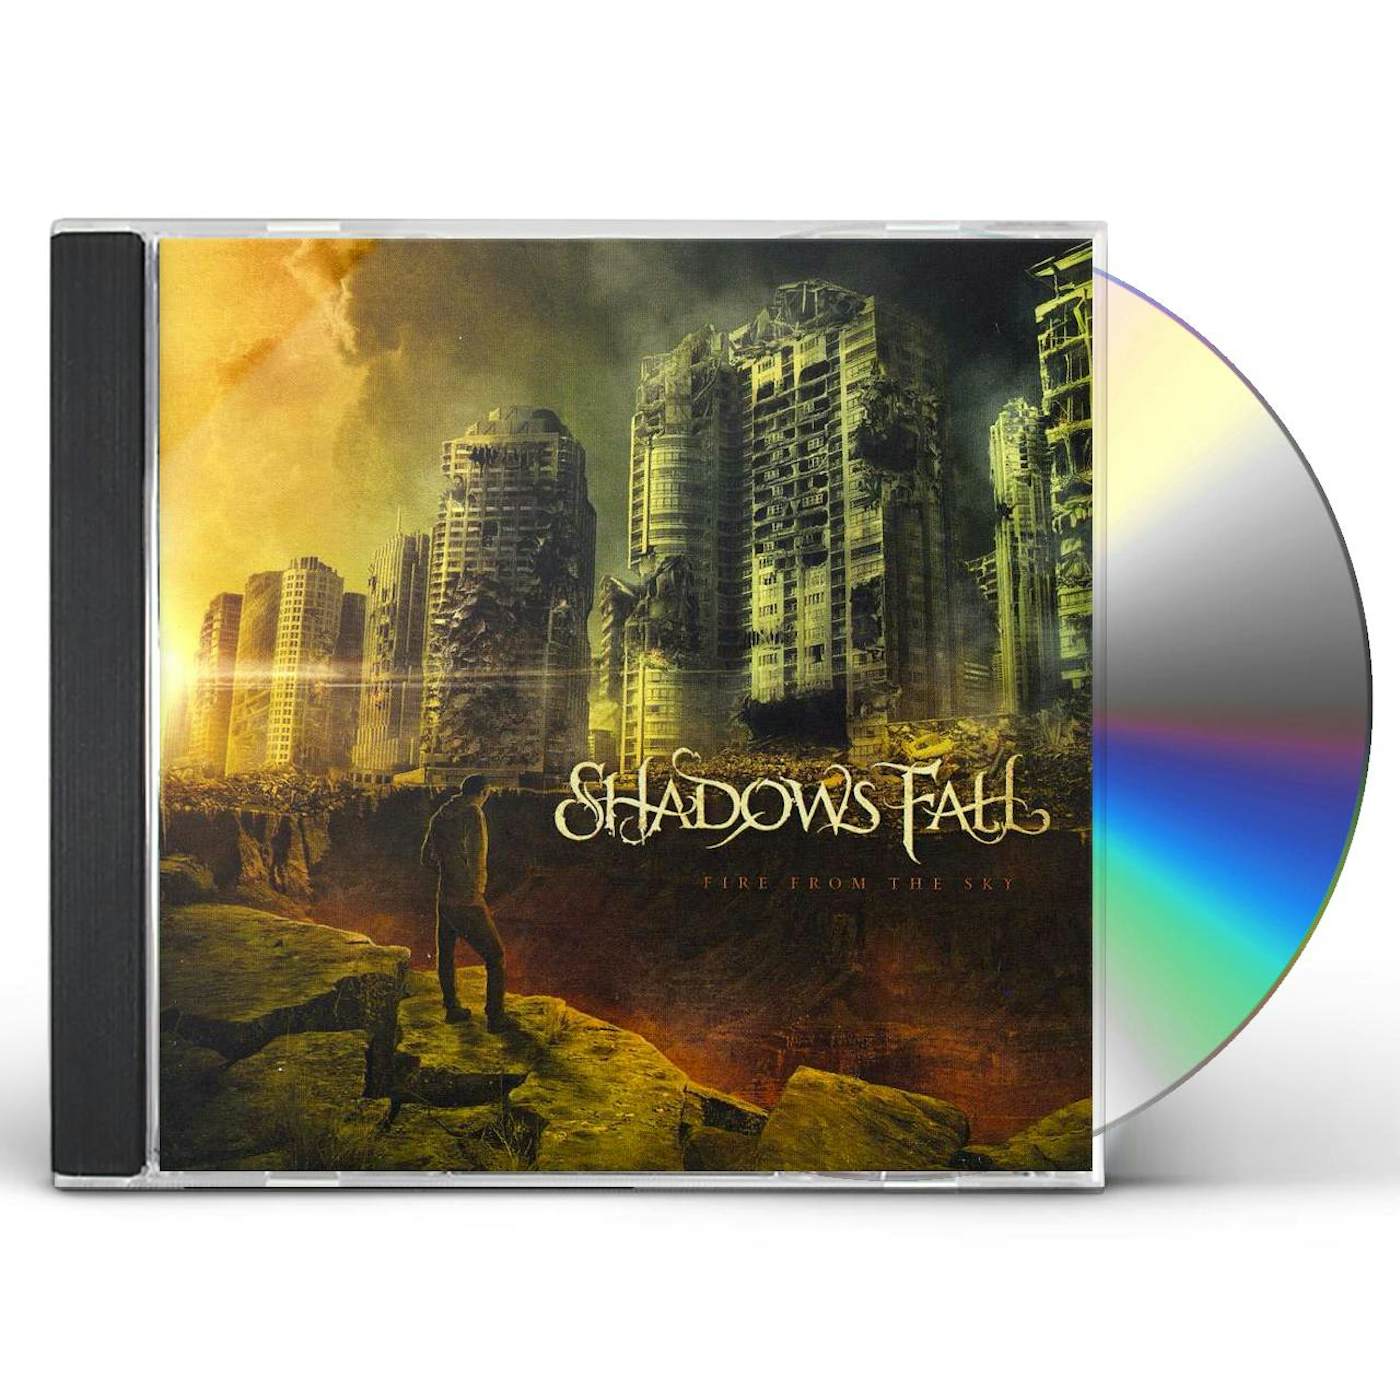 Shadows Fall FIRE FROM THE SKY CD